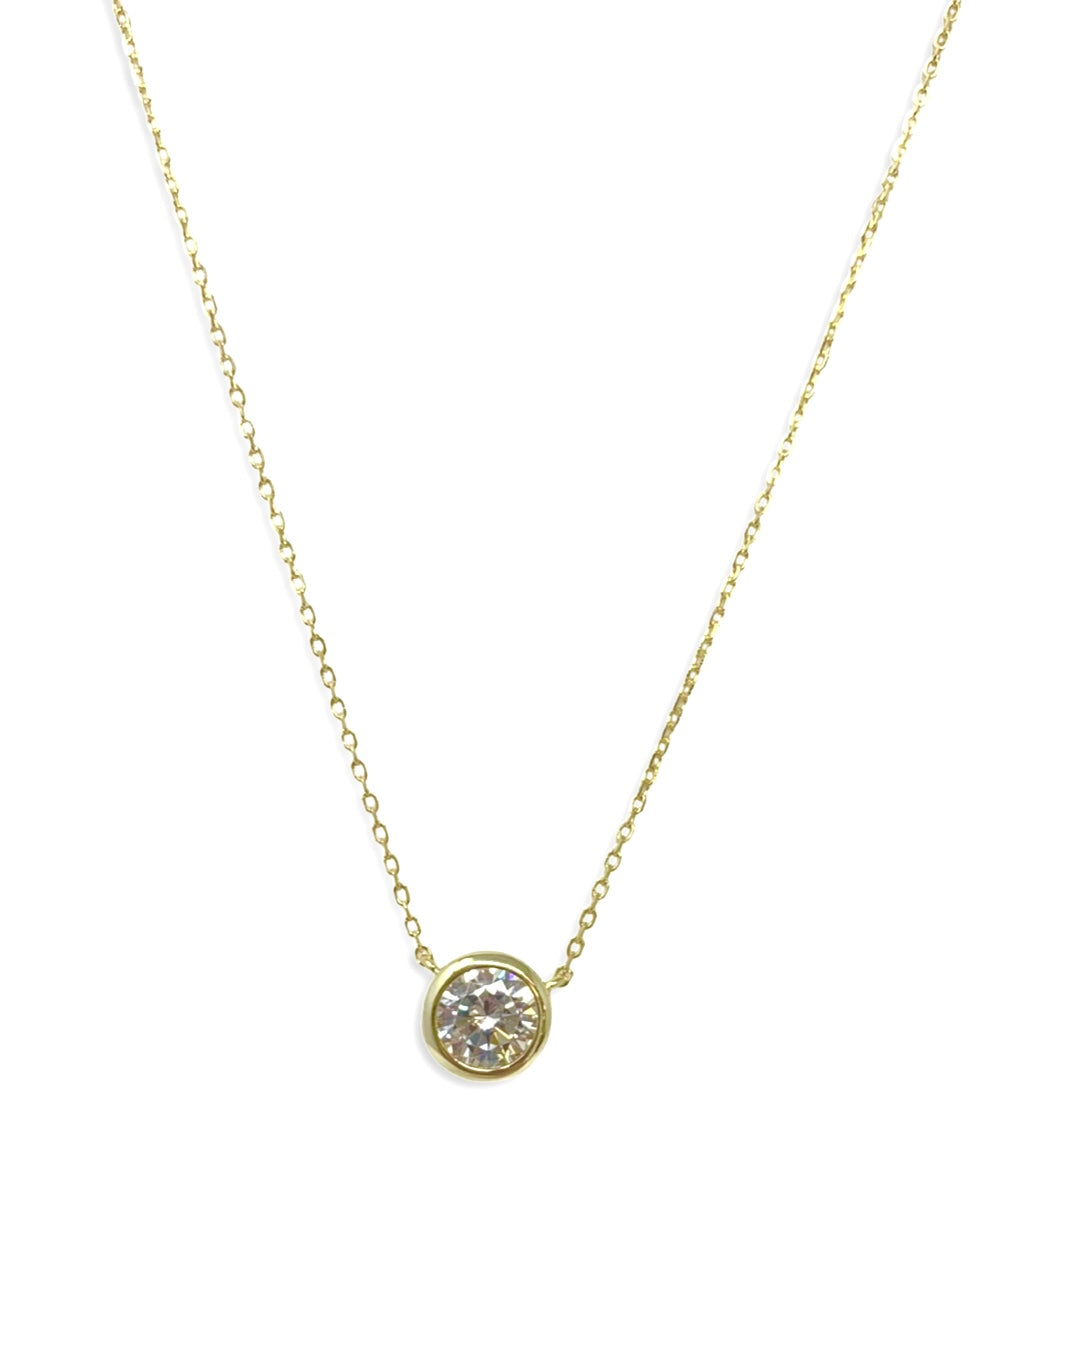 Tori Solitaire Necklace in Gold